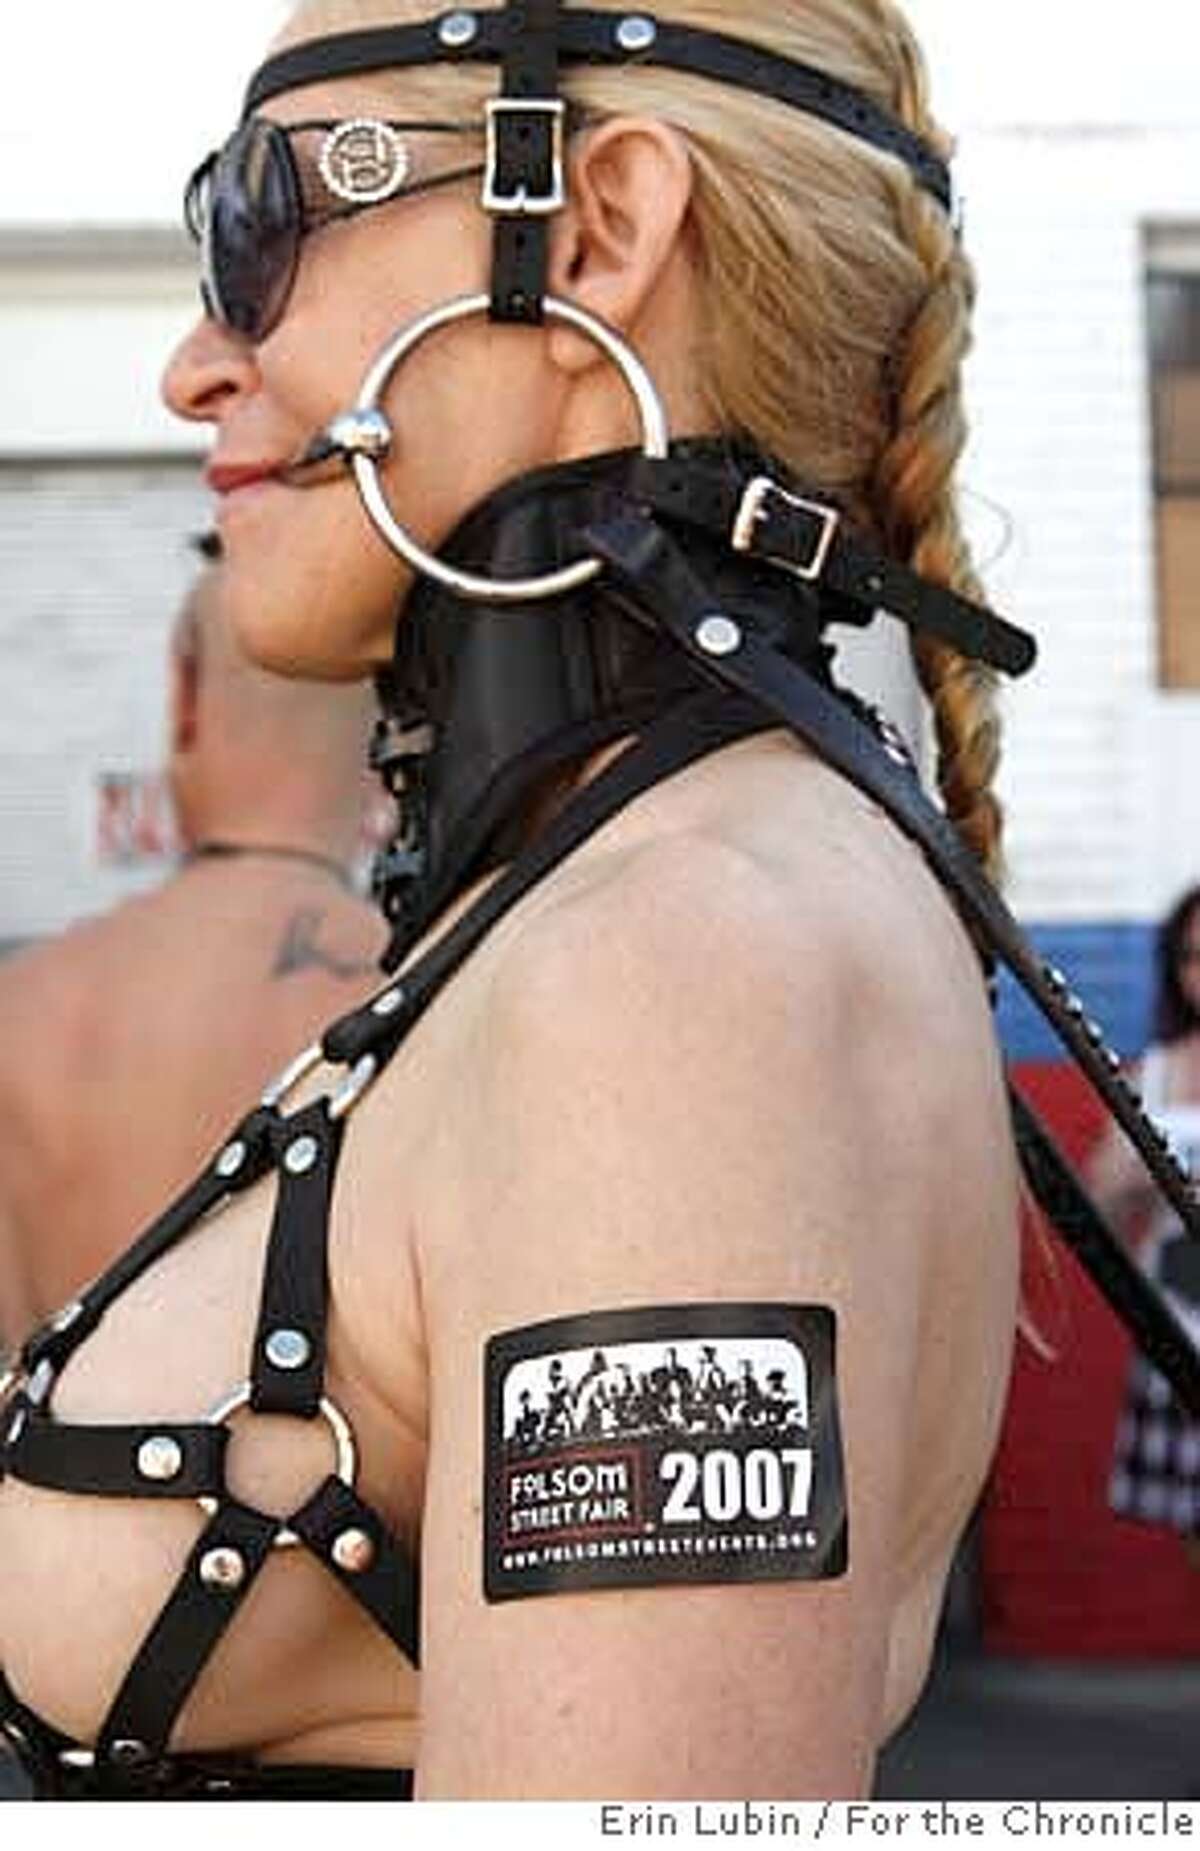 Ann Noble of Los Angeles, dresses like a pony for the Folsom Street Fair in San Francisco, CA Sunday, September 30, 2007. Event on 9/30/07 in San Francisco. Erin Lubin / For the Chronicle